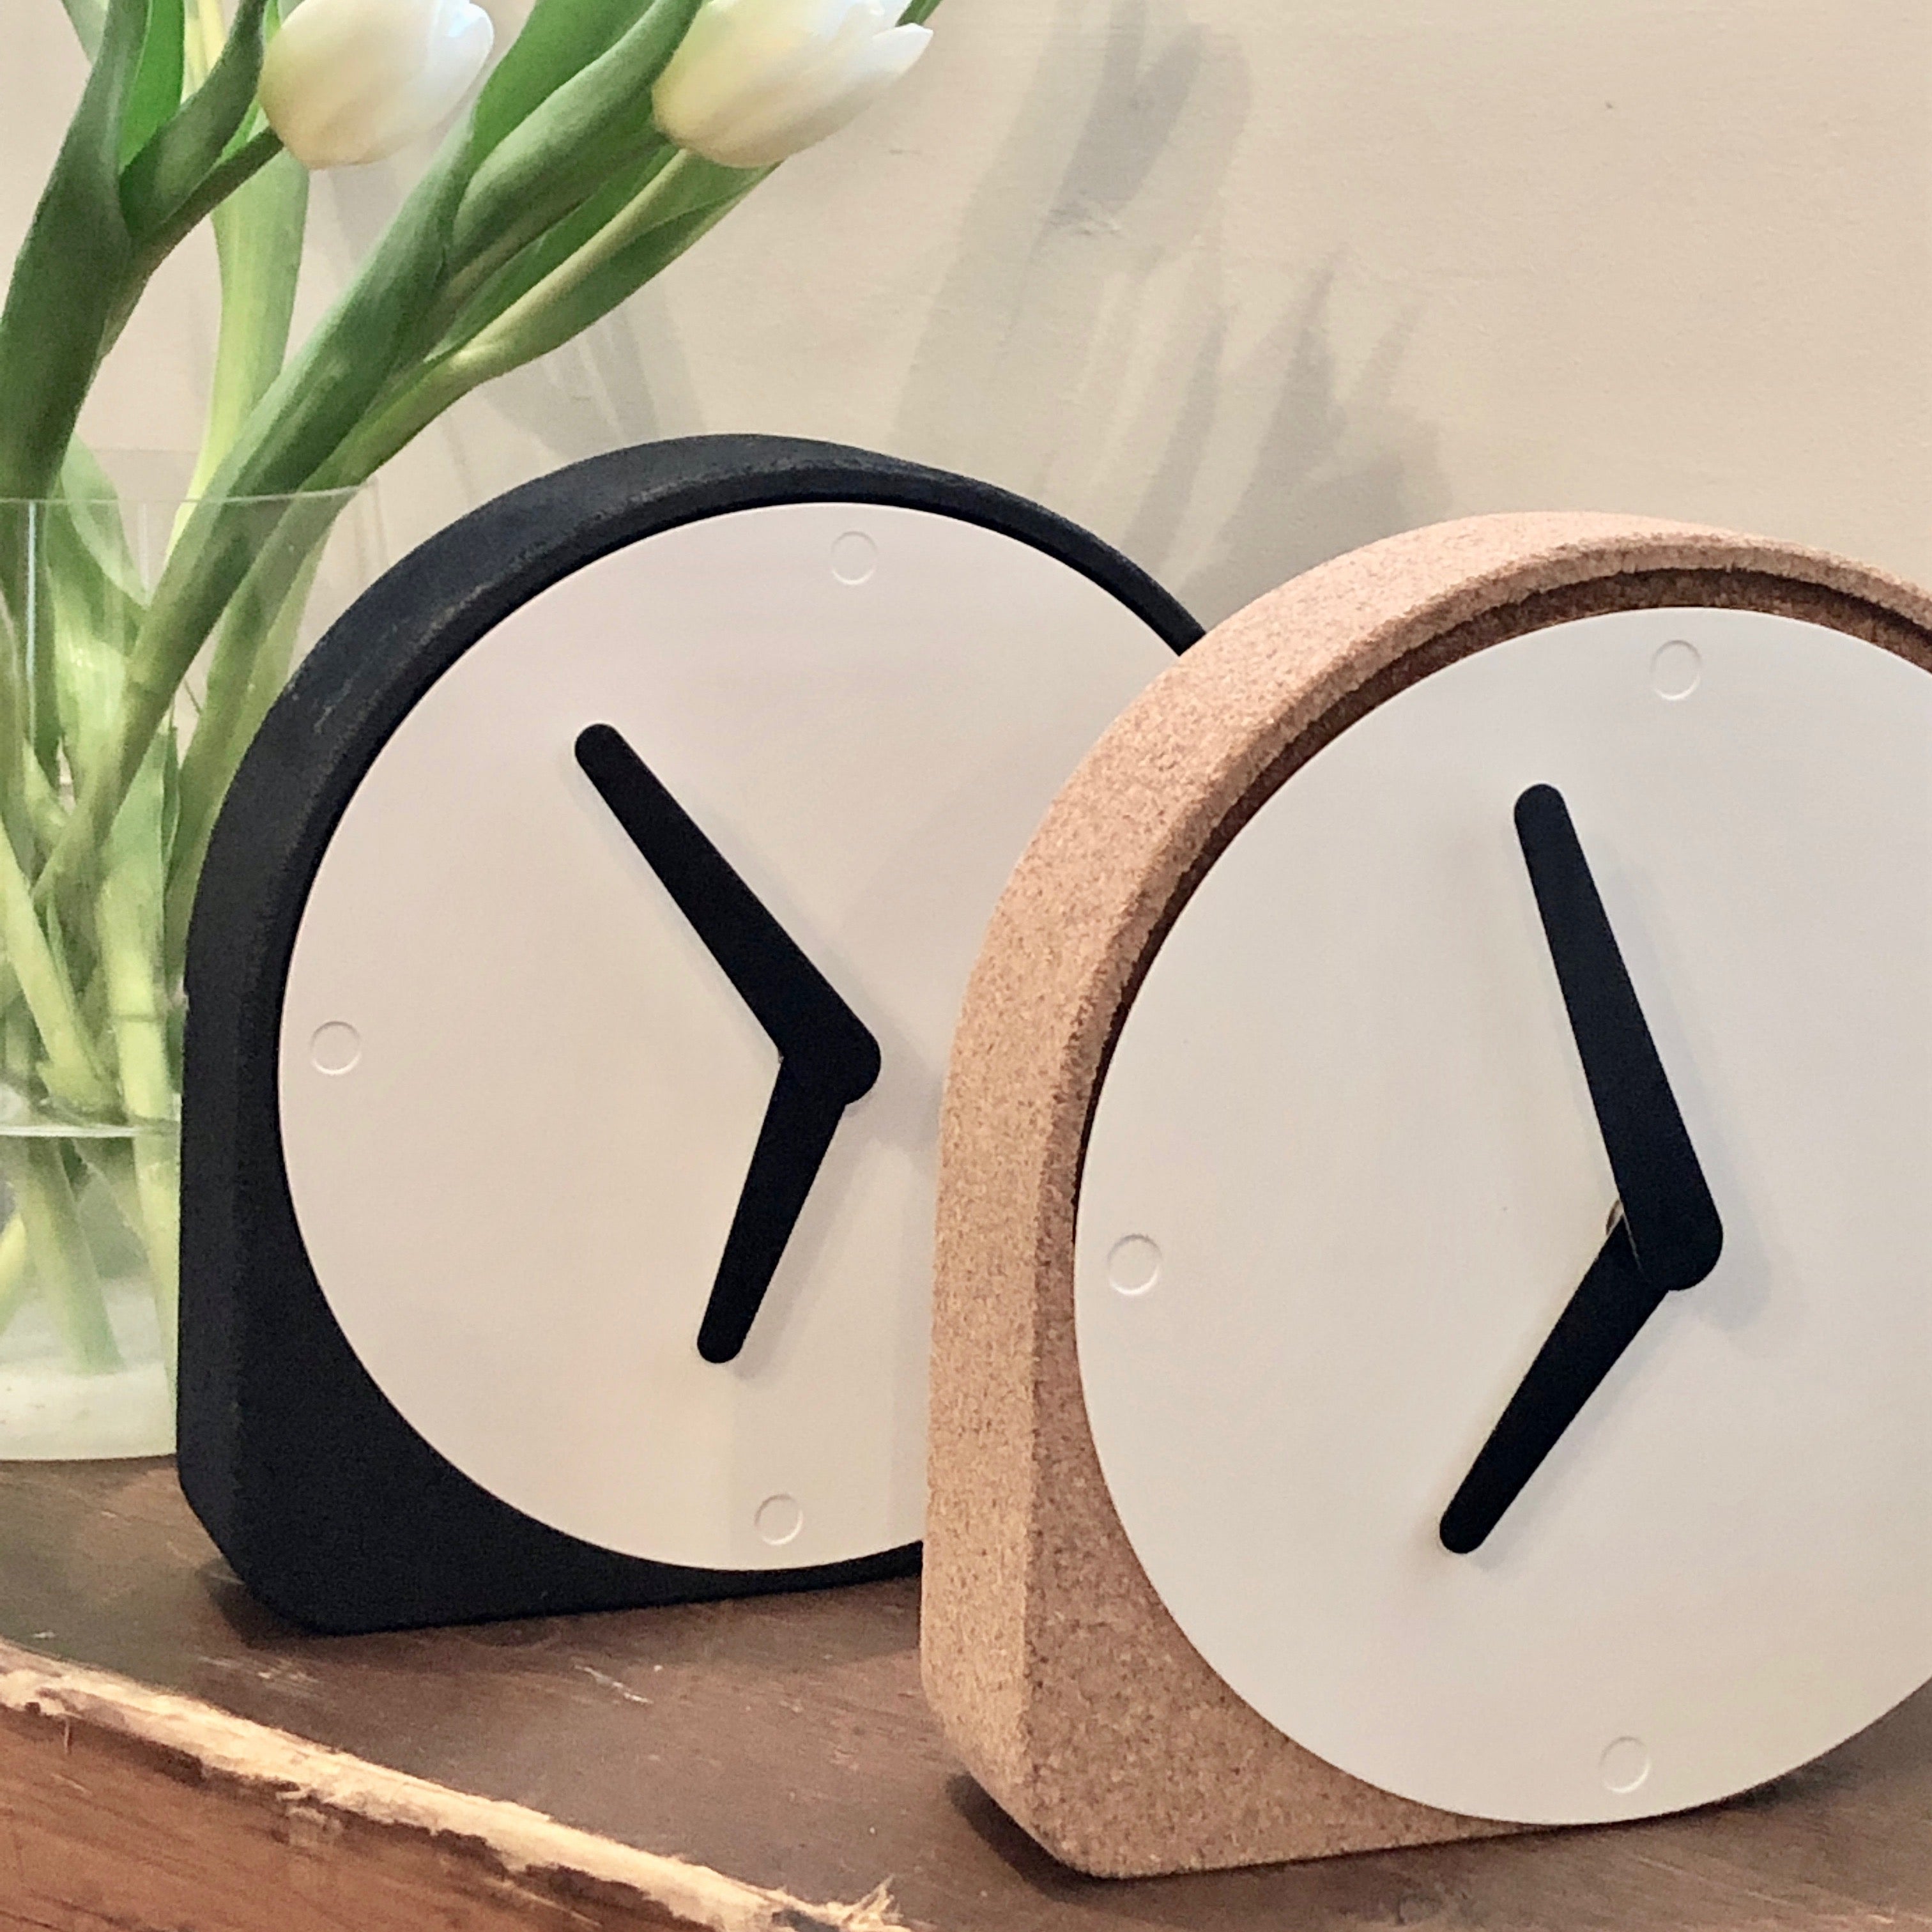 Ditch the predictable! CLORK by PuiK reinvents timekeeping with playful cork & sleek metal. Unique balanced design adds a touch of nature & modern flair to any room. Shop sustainable clocks now!